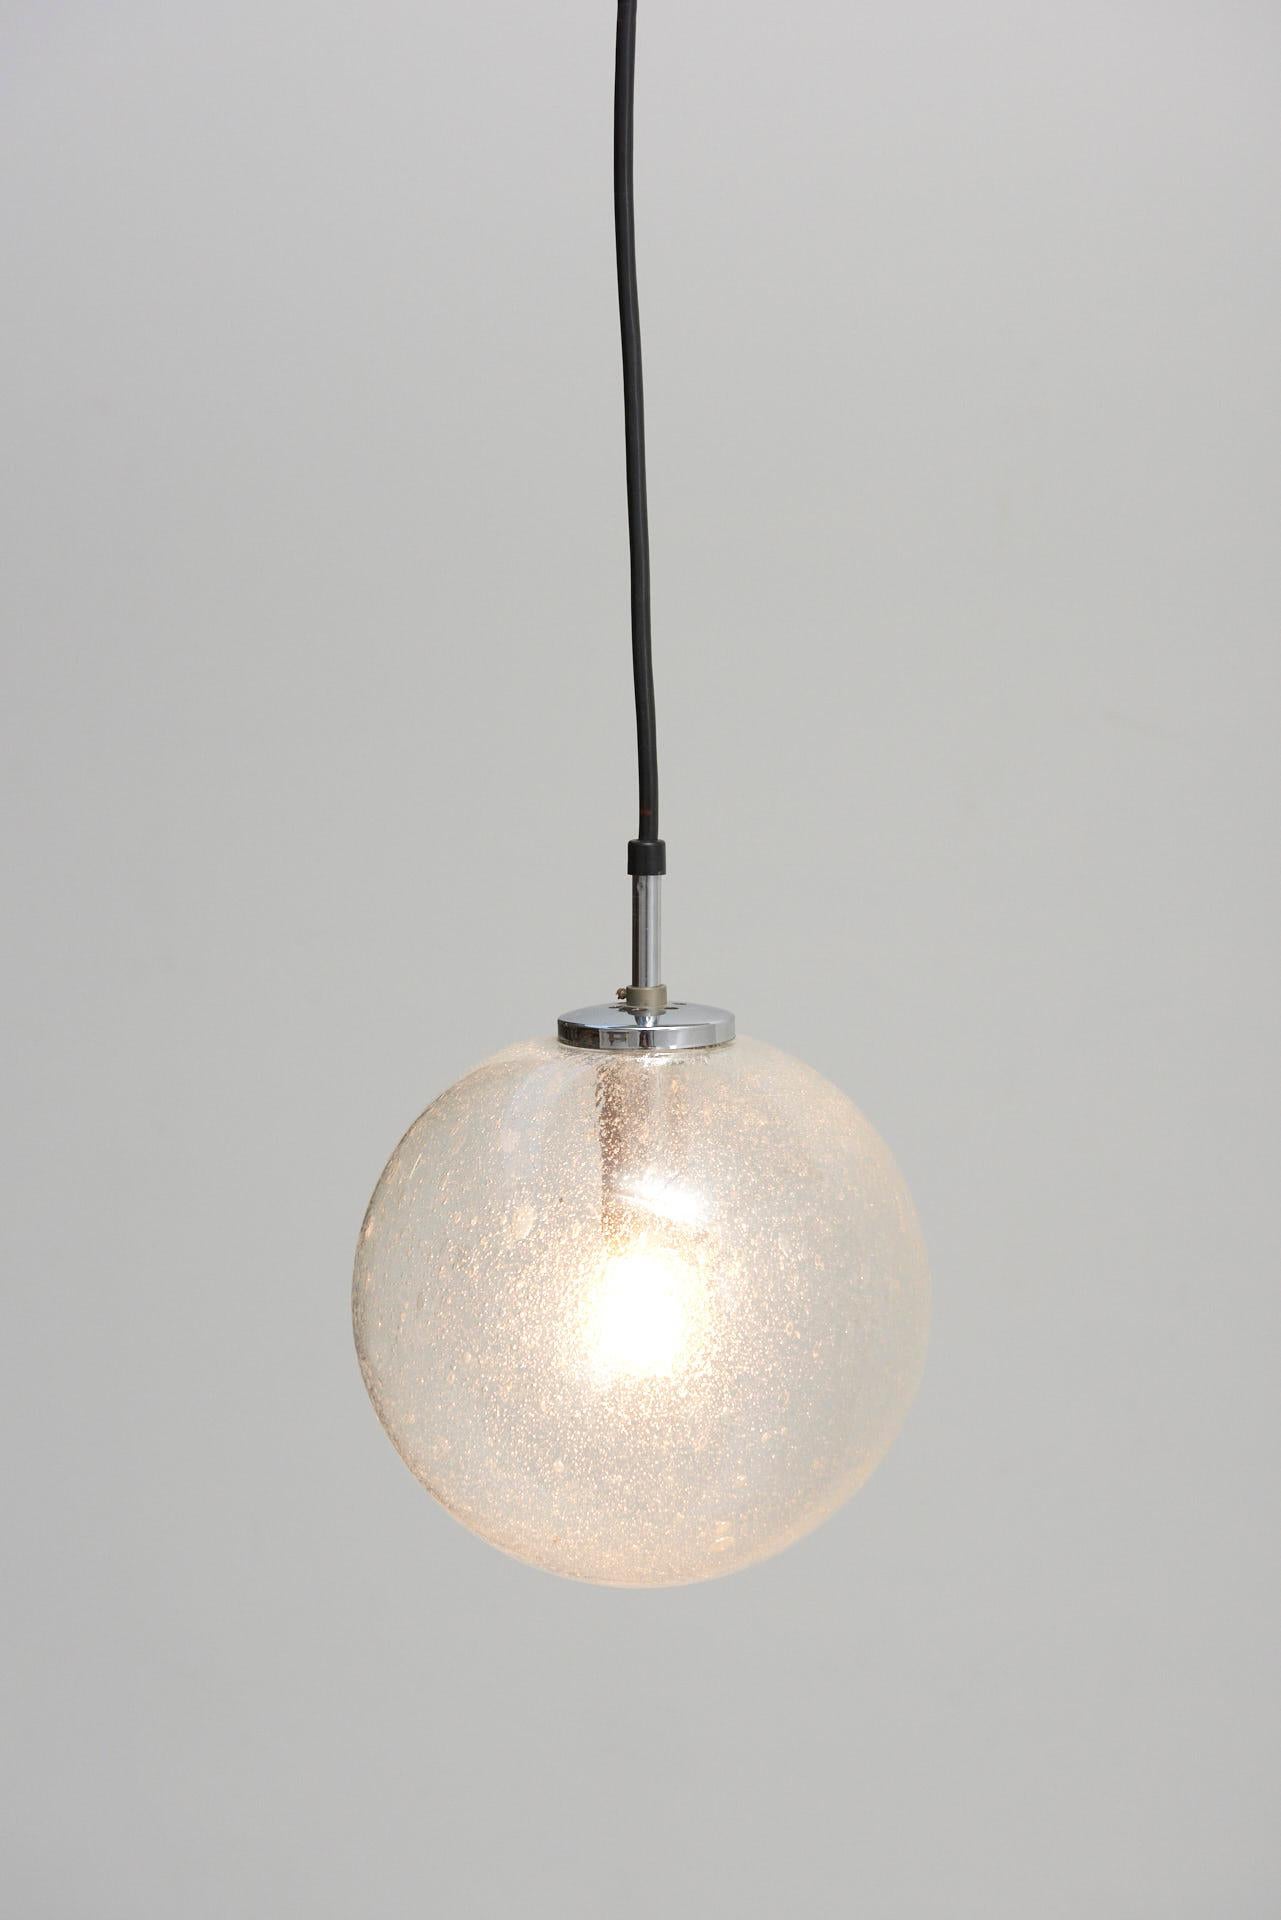 A set of 6 pendant lamps, with bubble glass spheres in various sizes. The spheres have chrome-plated suspensions. Made by Glashütte Limburg in Germany.